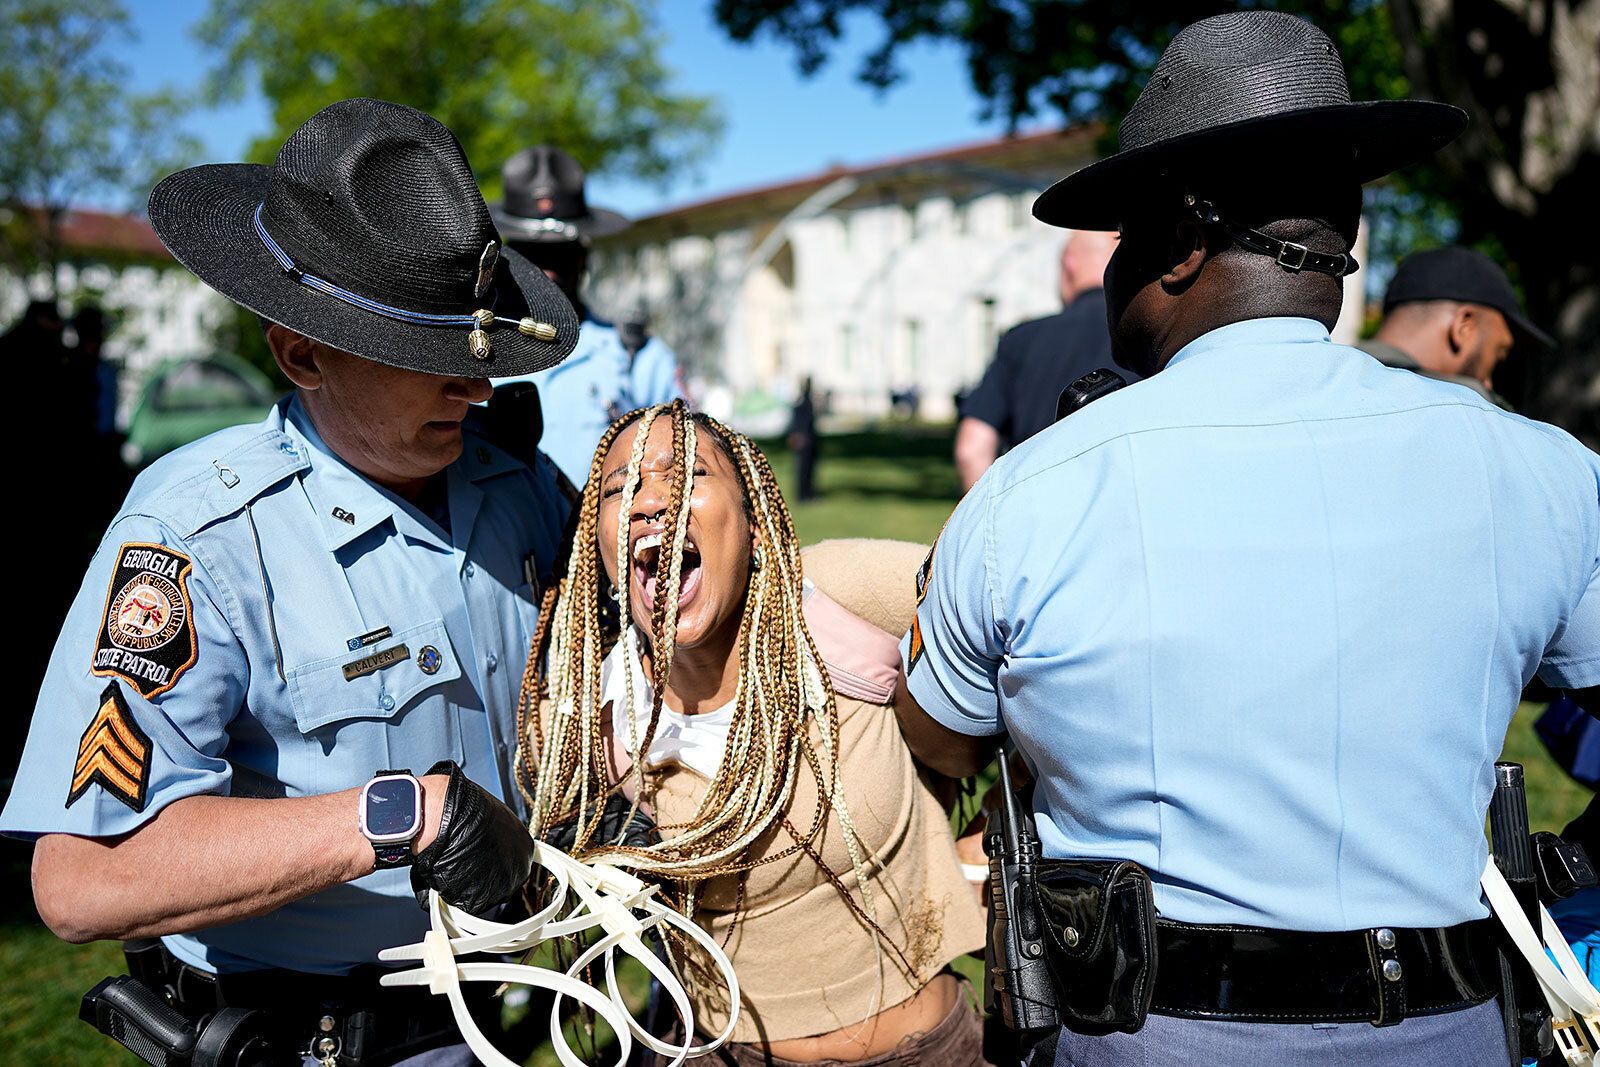 Georgia State Patrol officers detain a demonstrator on the campus of Emory University during a pro-Palestinian demonstration in Atlanta on Thursday, April 25.